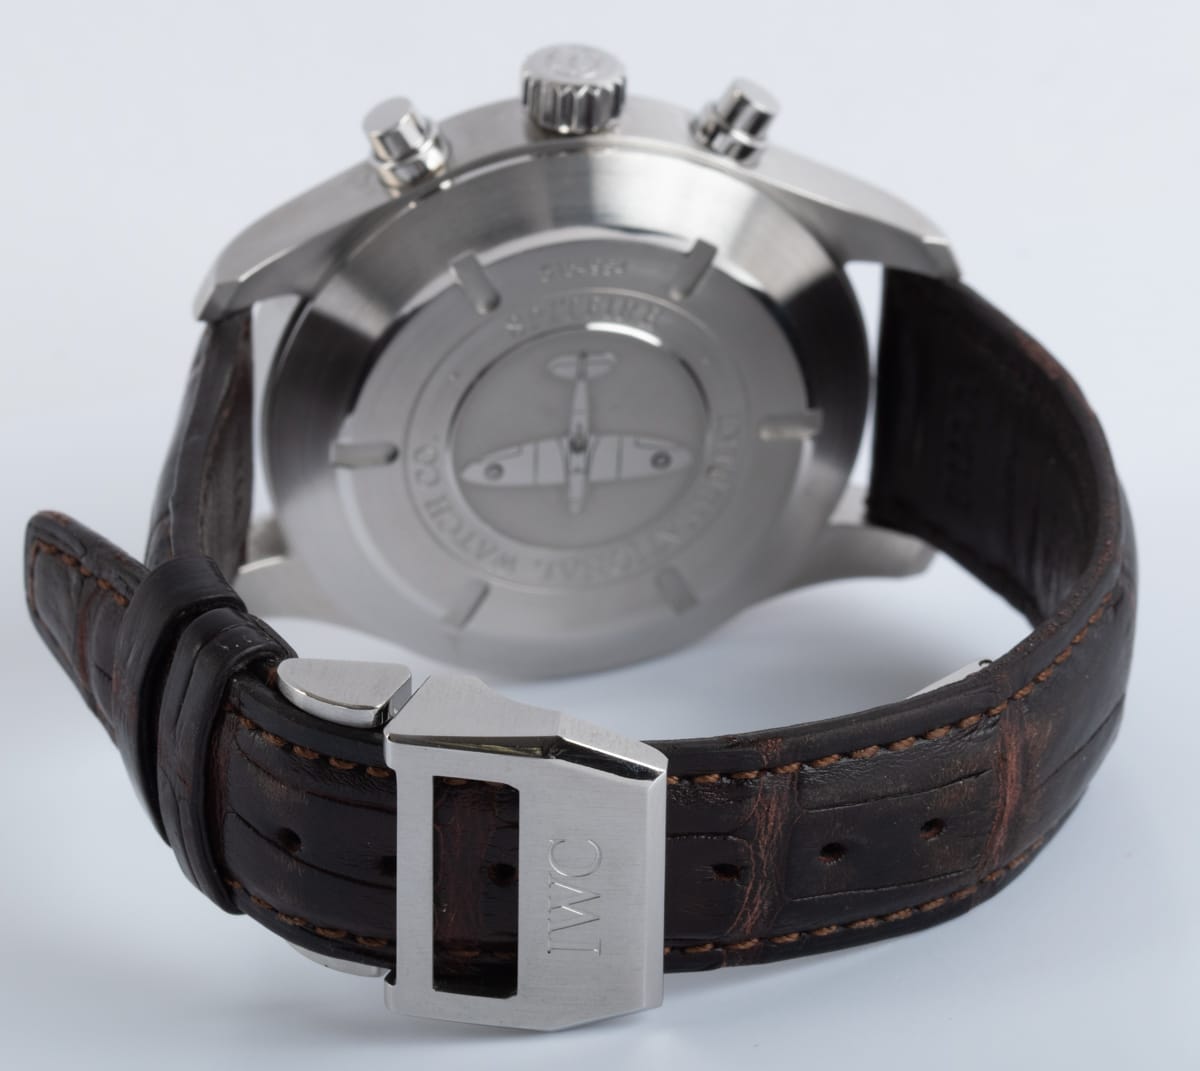 Rear / Band View of Spitfire Flyback Chronograph